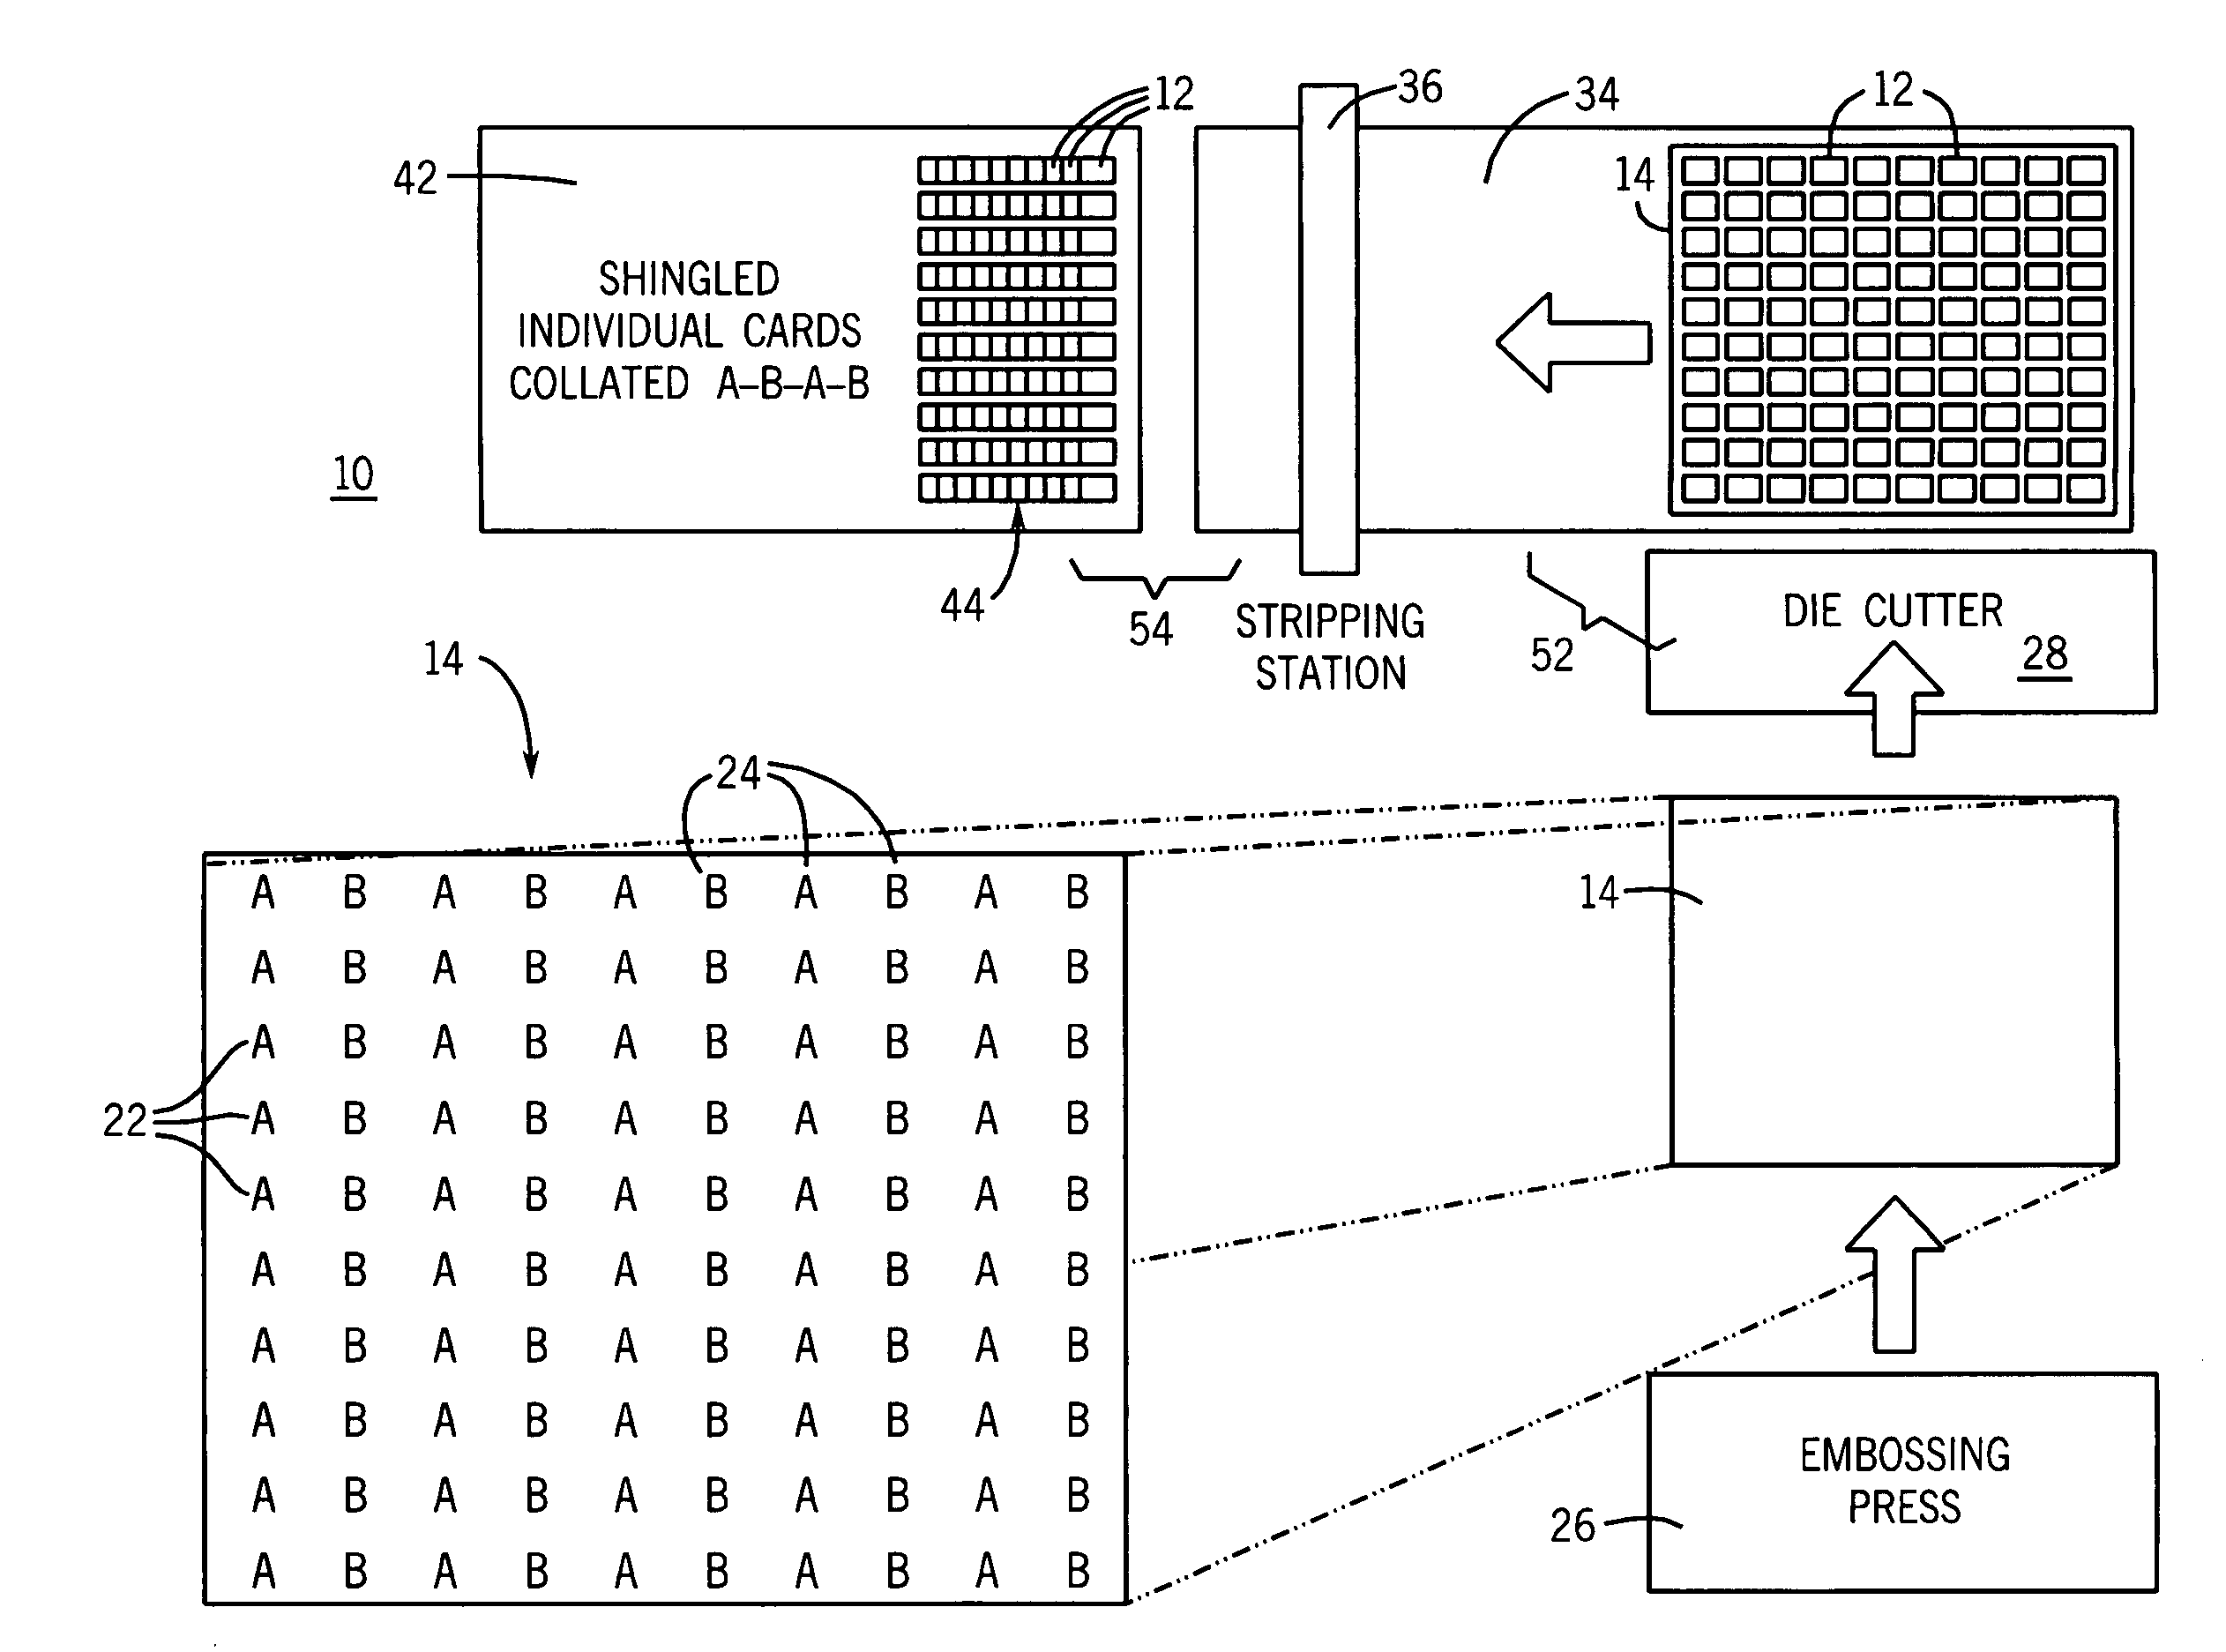 Apparatus and methods for preventing engagement of stacked embossed cards